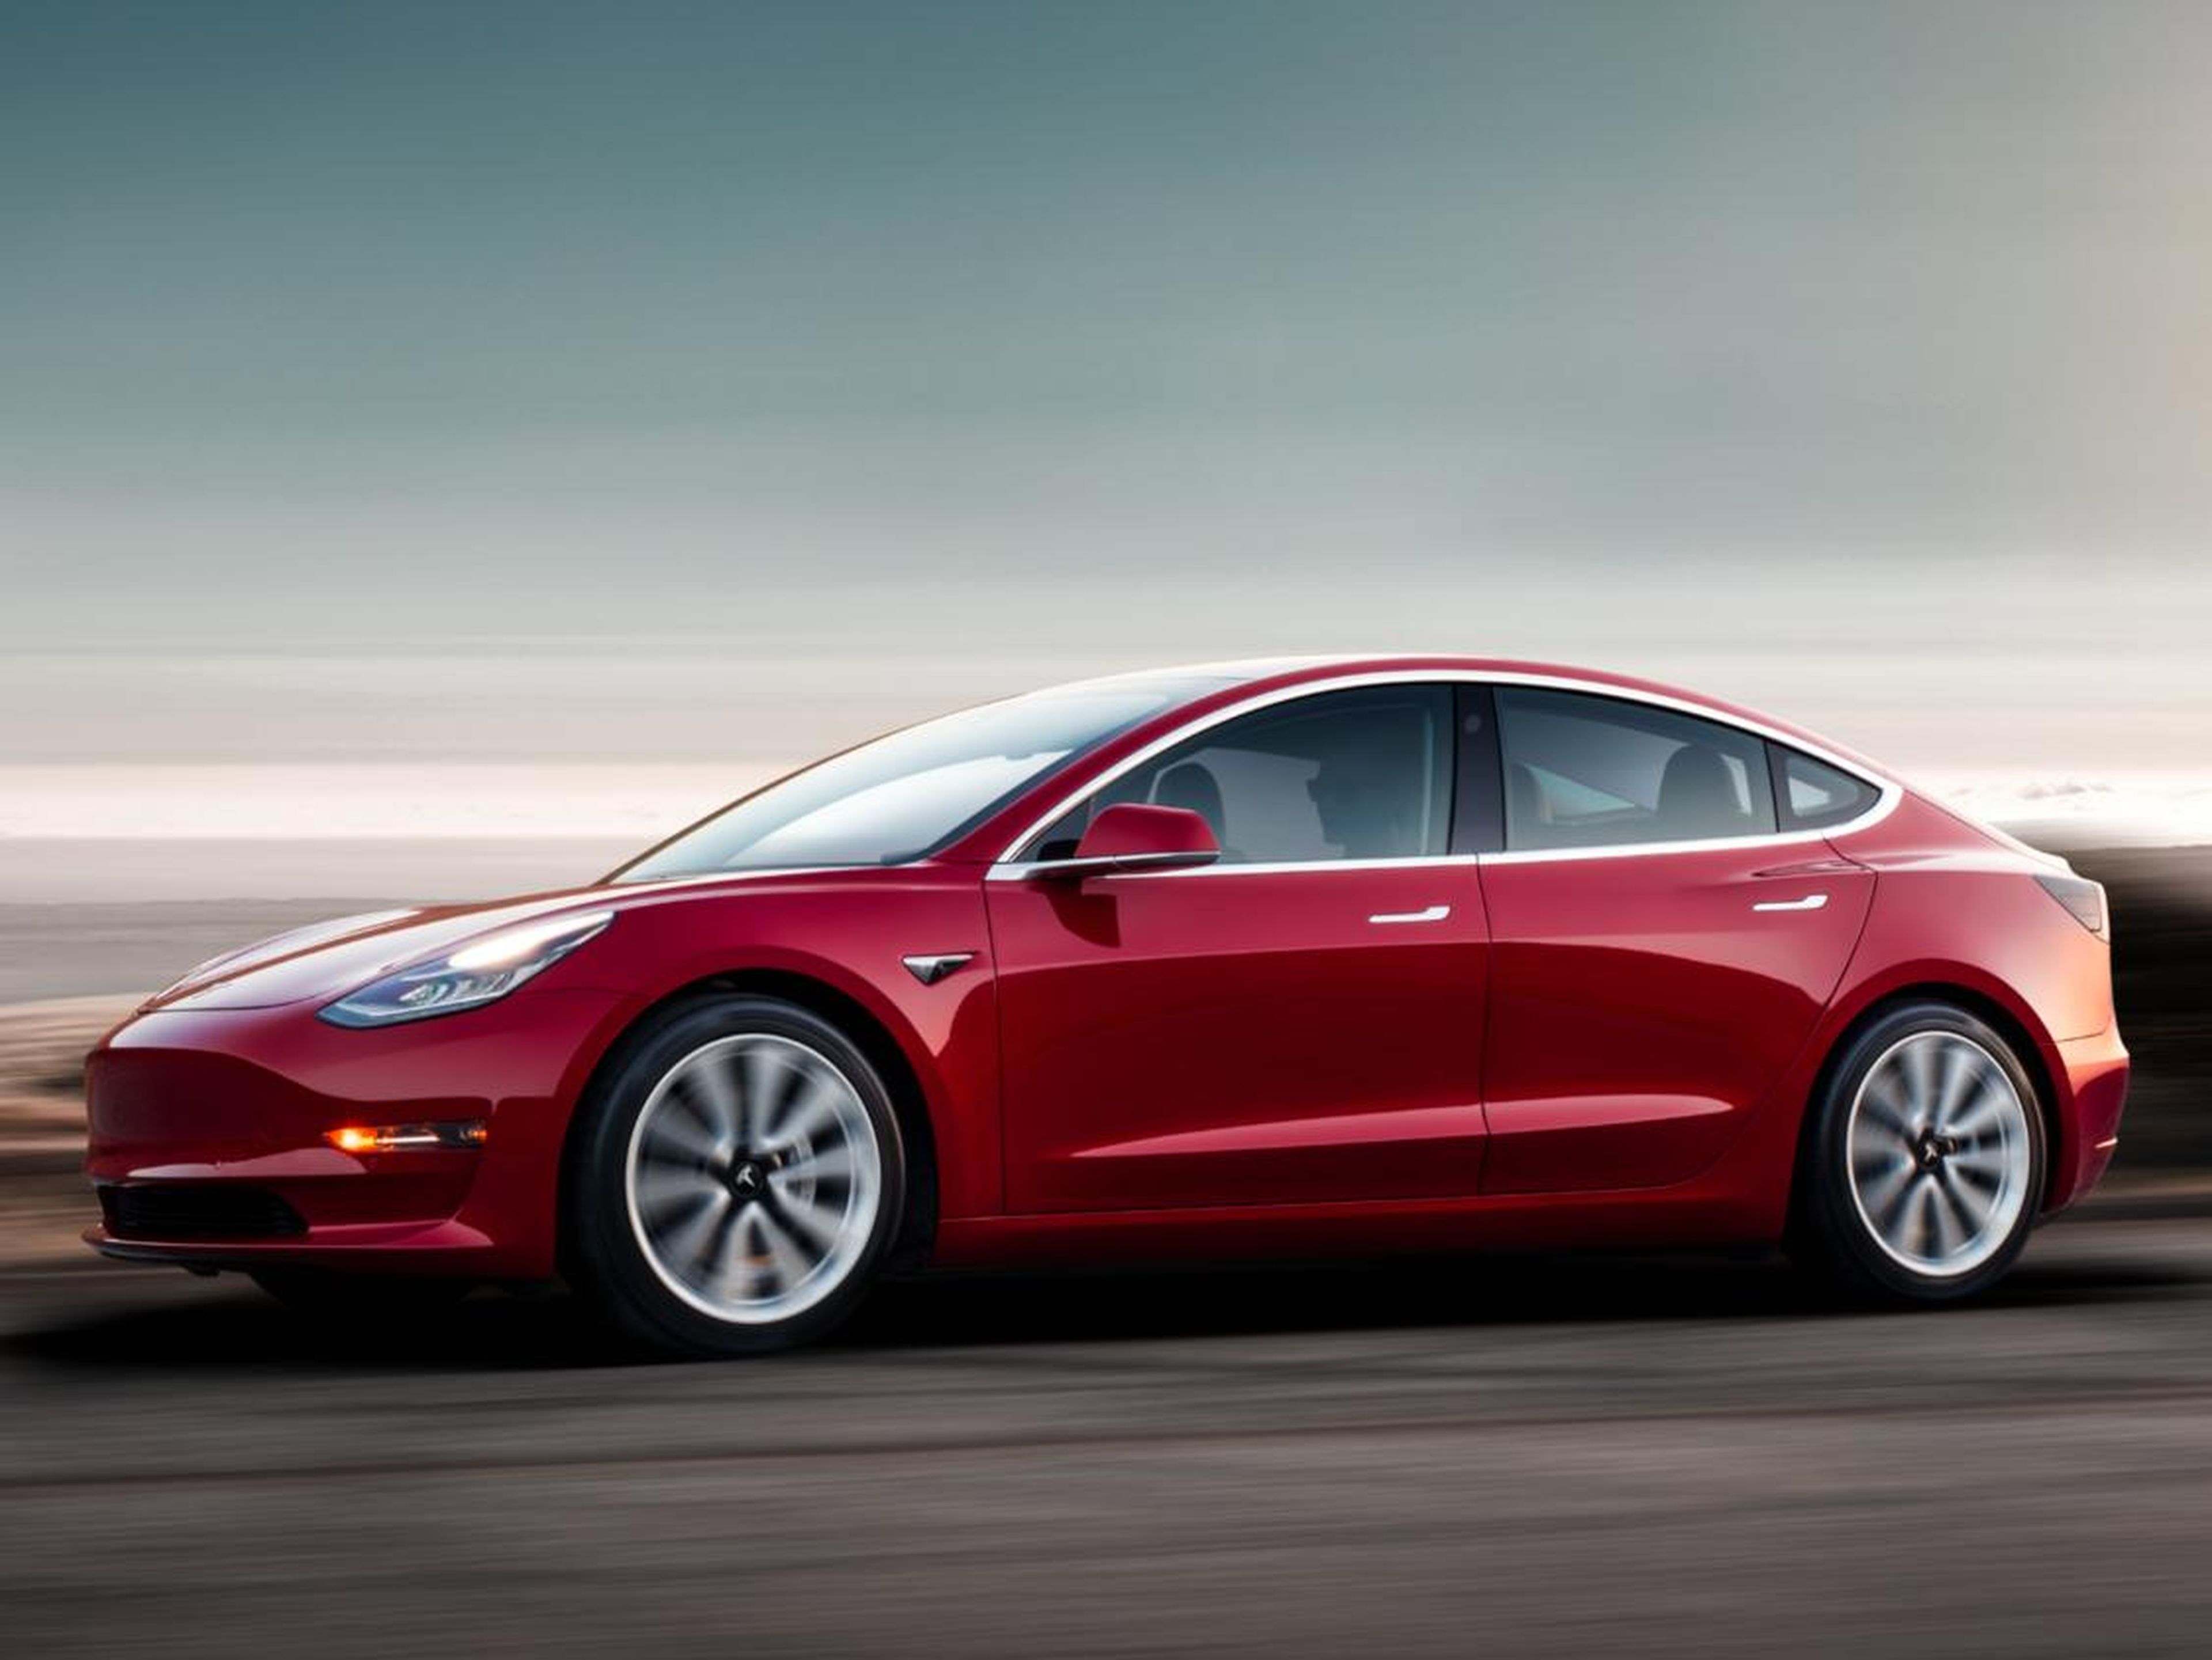 4. The standard Model 3 can accelerate from 0 to 60 miles per hour in just 5.1 seconds. The Model 3 Performance gets there faster, though, and can reach that speed in just 3.5 seconds.